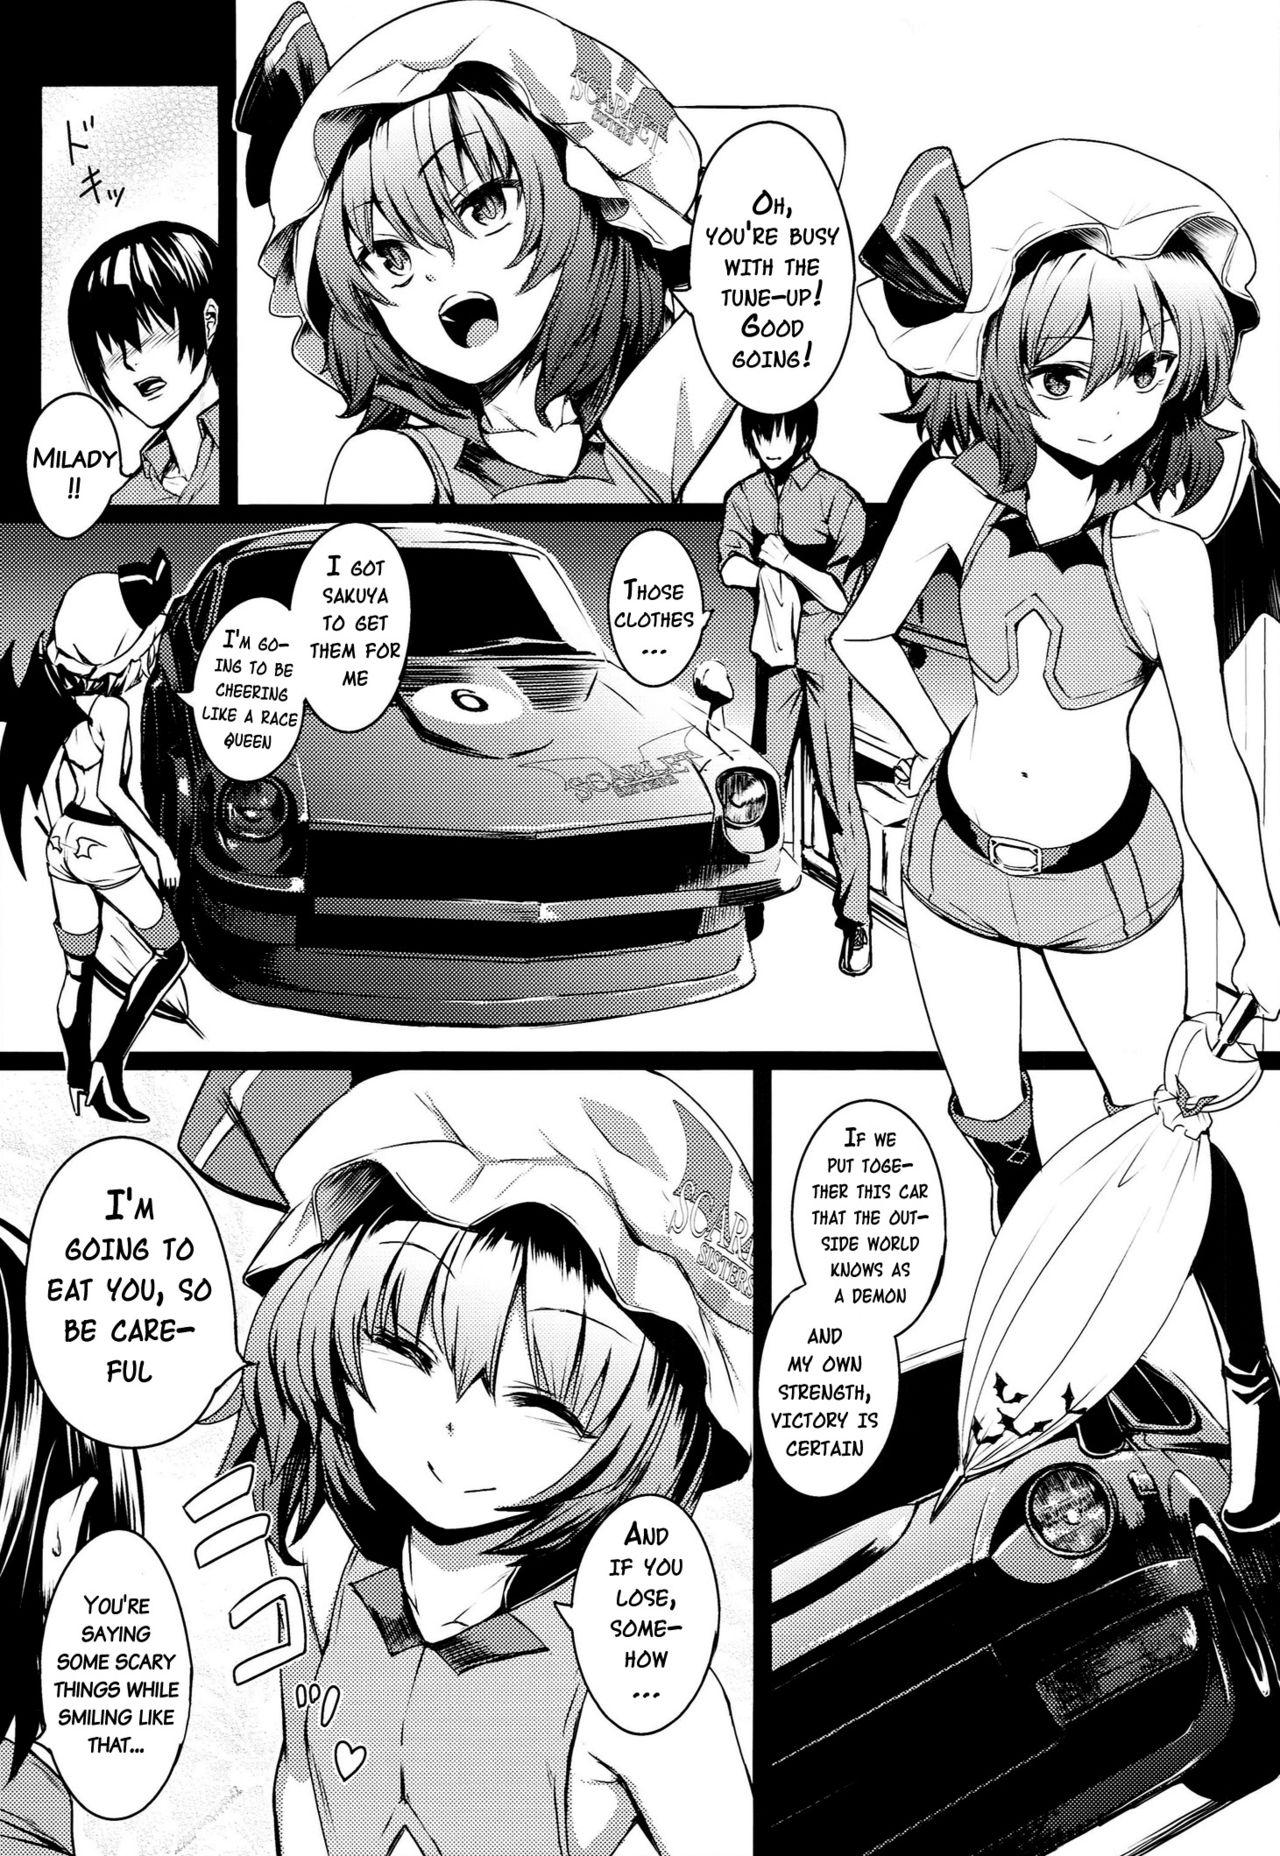 Pussylicking TOUHOU RACE QUEENS COLLABO CLUB - Touhou project Old Young - Page 4